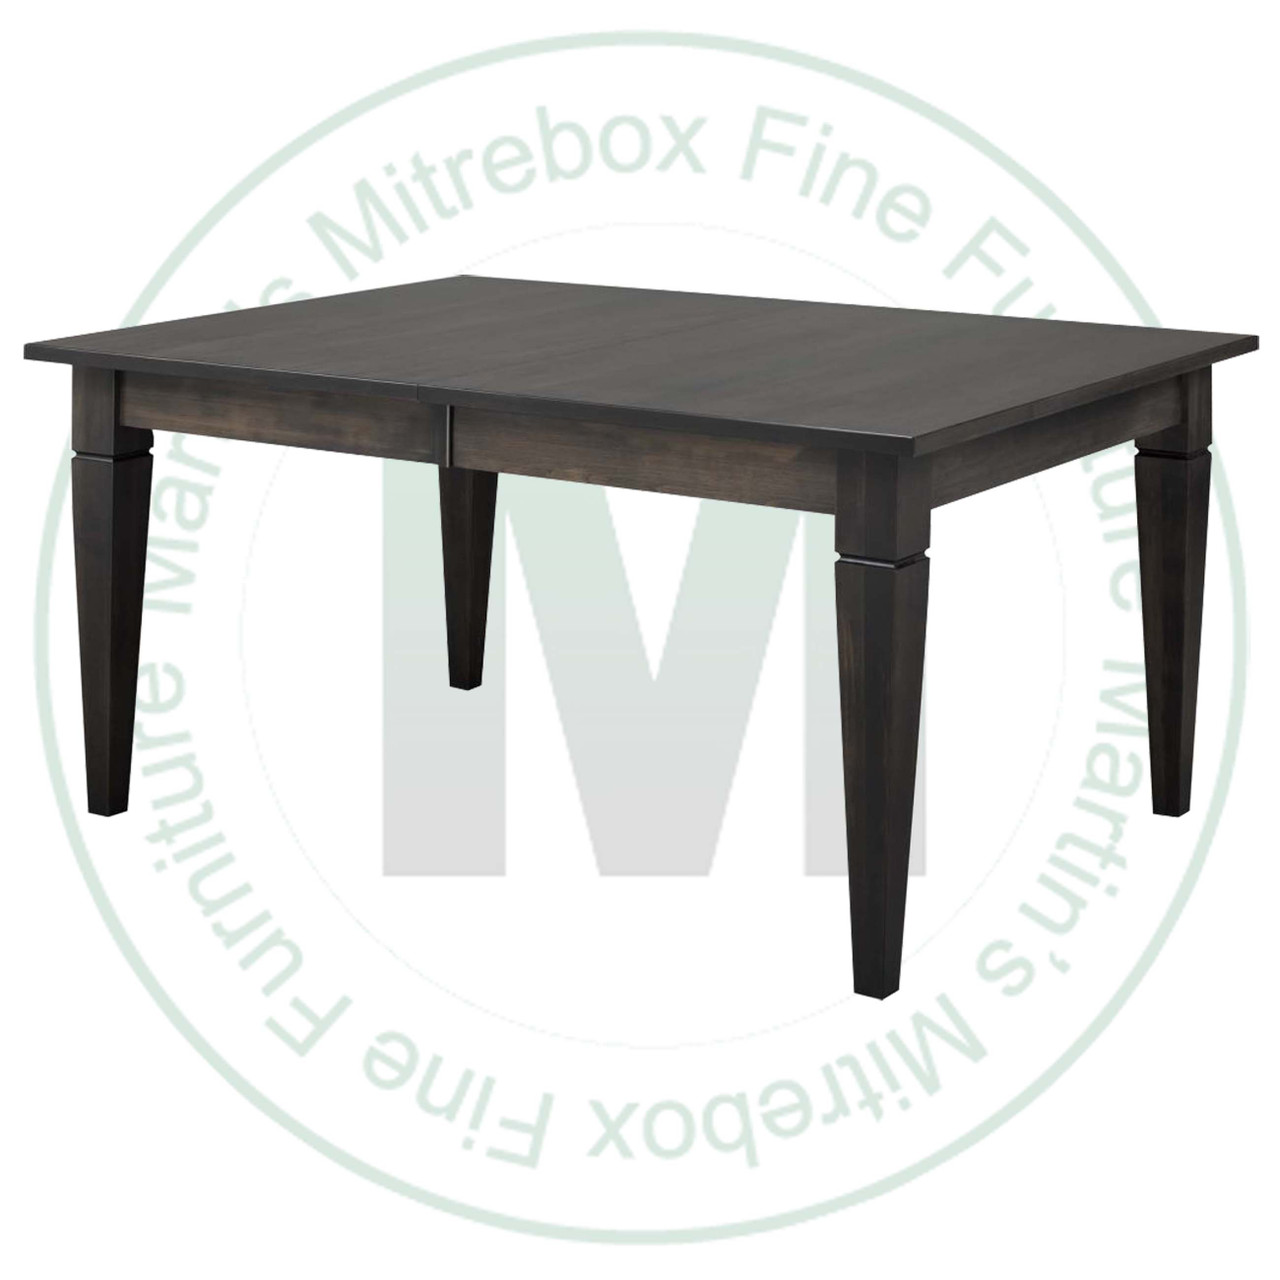 Maple Reesor Solid Top Harvest Table 48''D x 84''W x 30''H Table Has 1'' Thick Top And 2 - 16'' Extensions